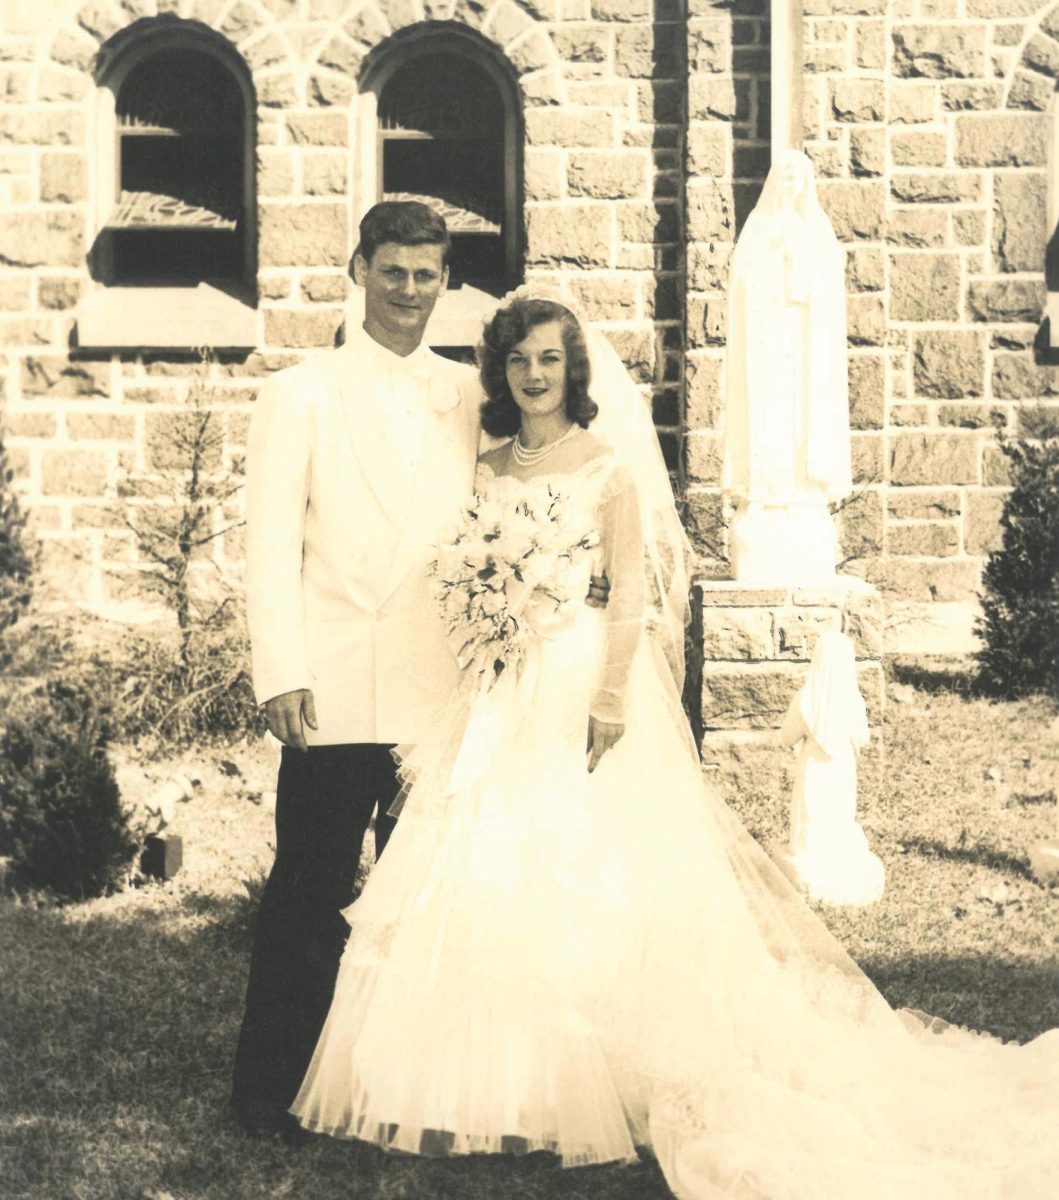 Russ and Mary Fink